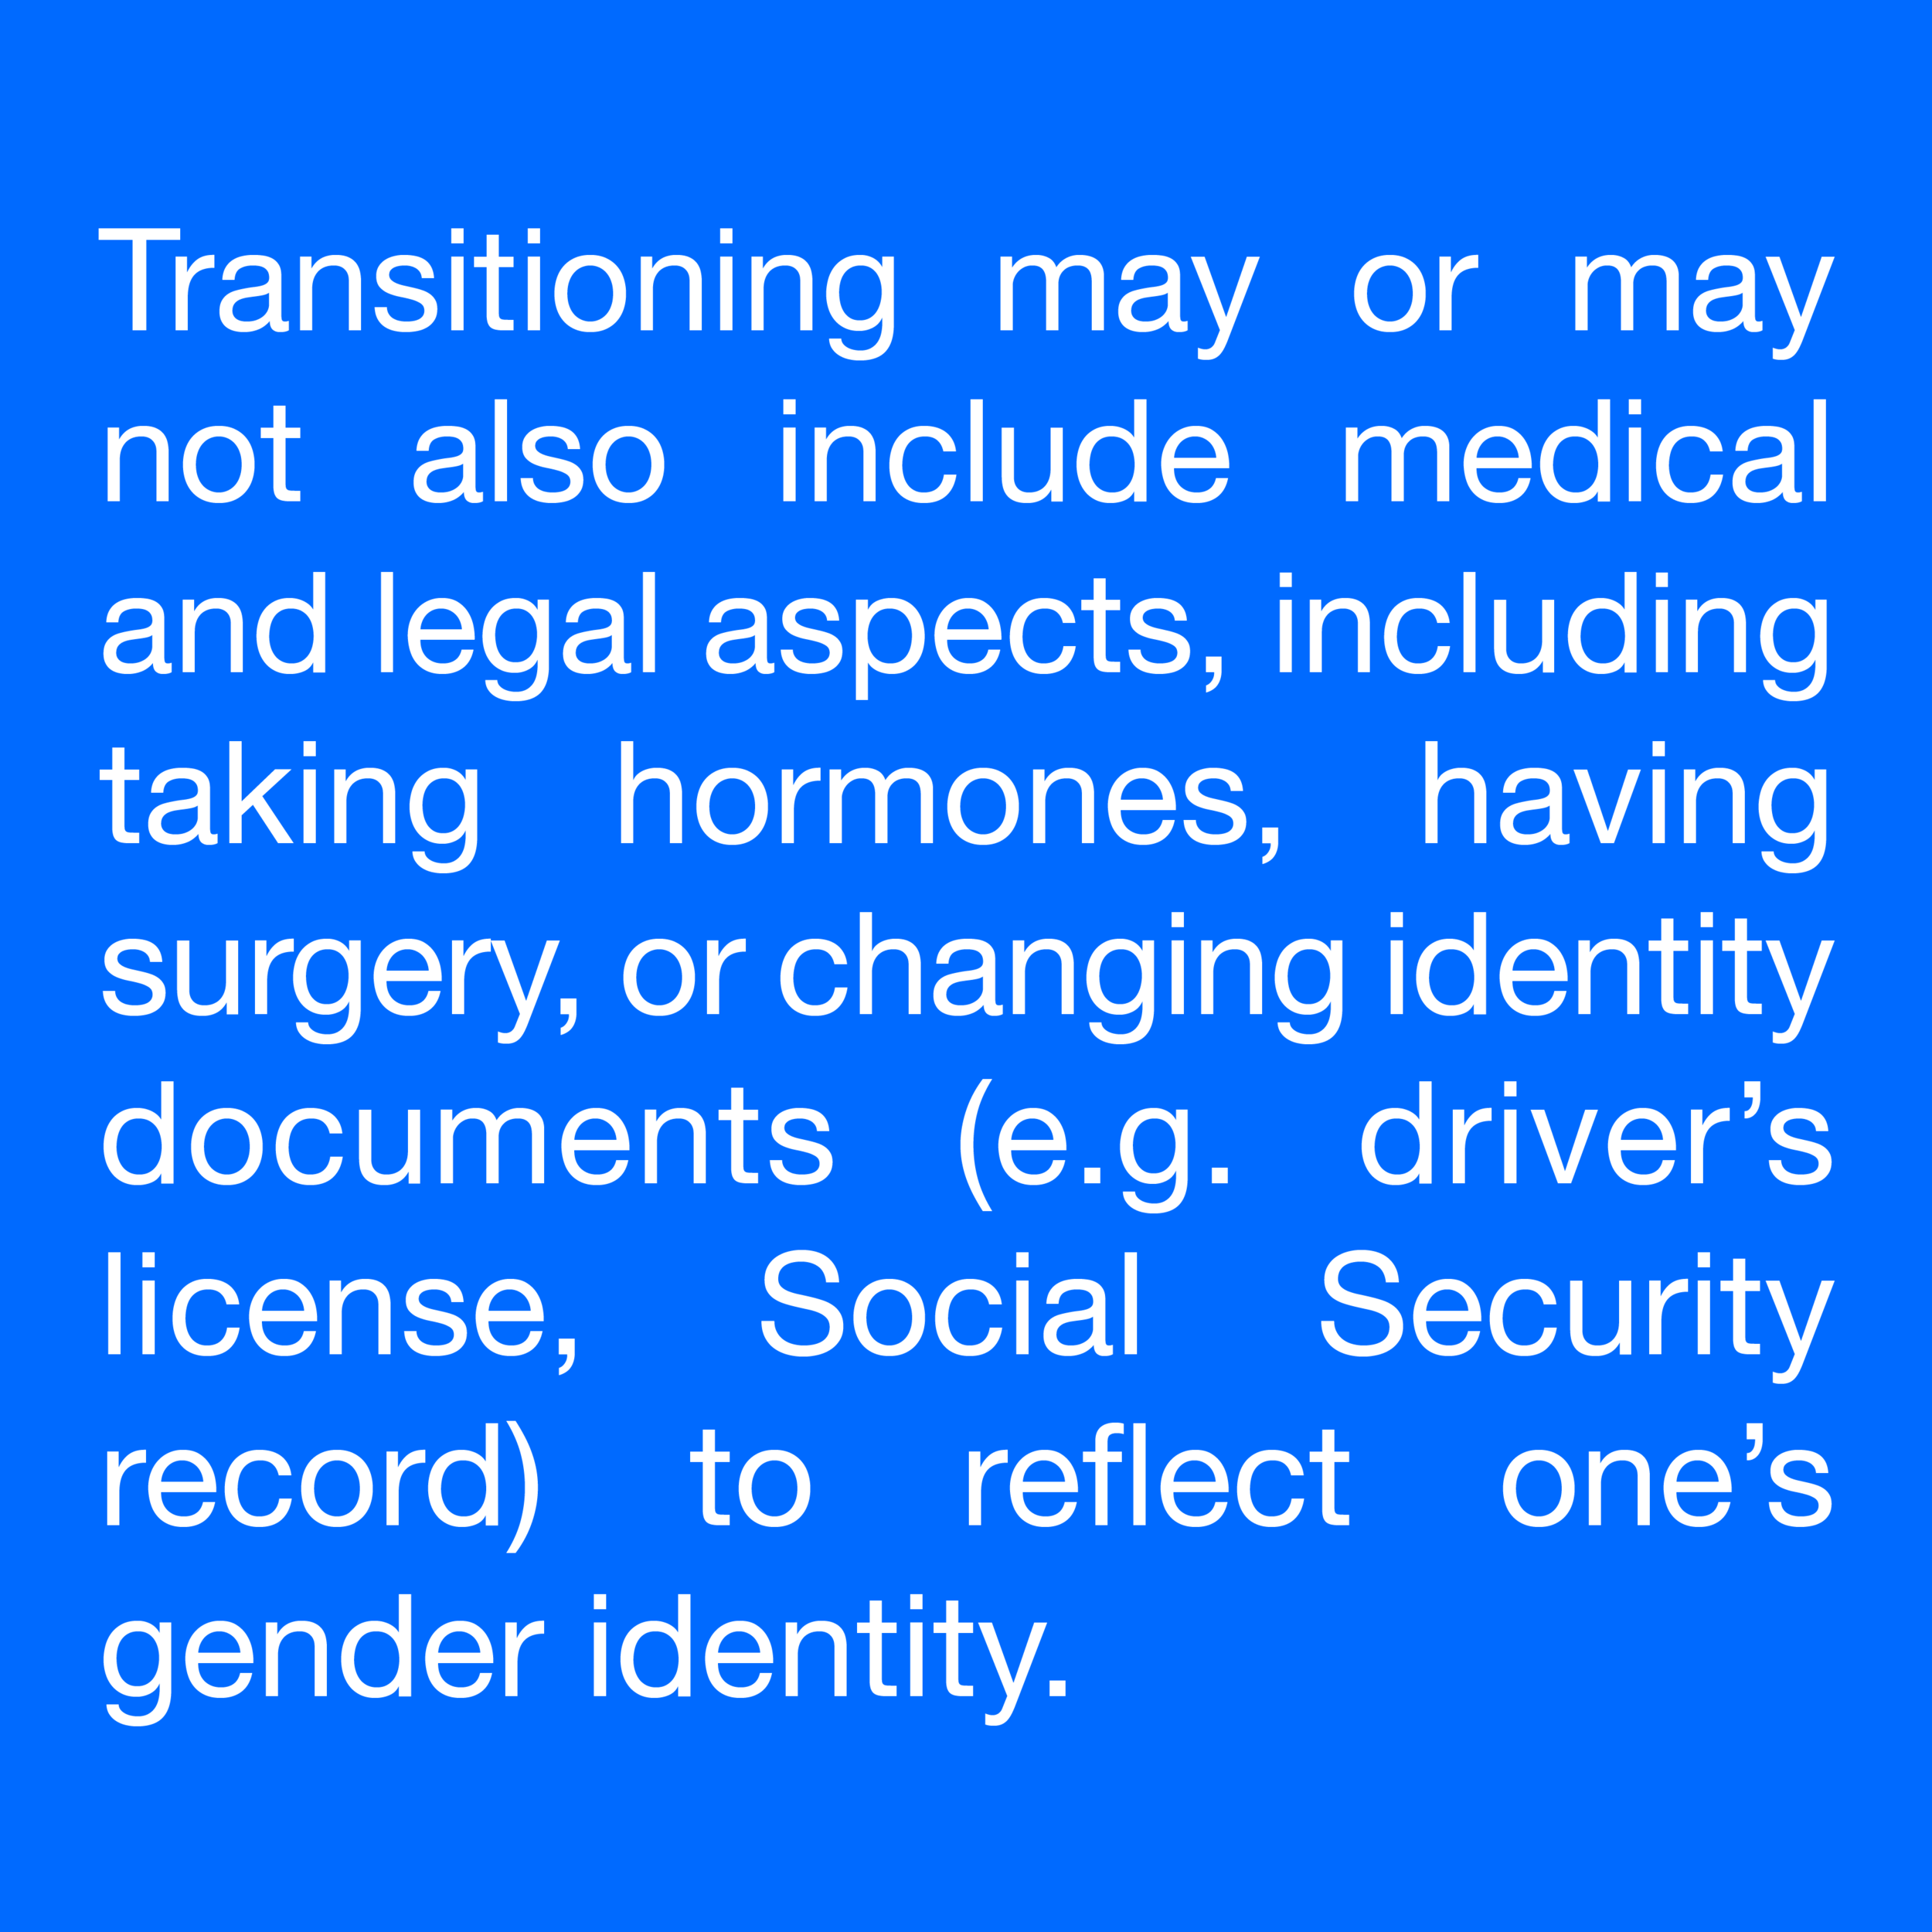  Transitioning may or may not also include medical and legal aspects, including taking hormones, having surgery, or changing identity documents (e.g. driver’s license, Social Security record) to reflect one’s gender identity. 